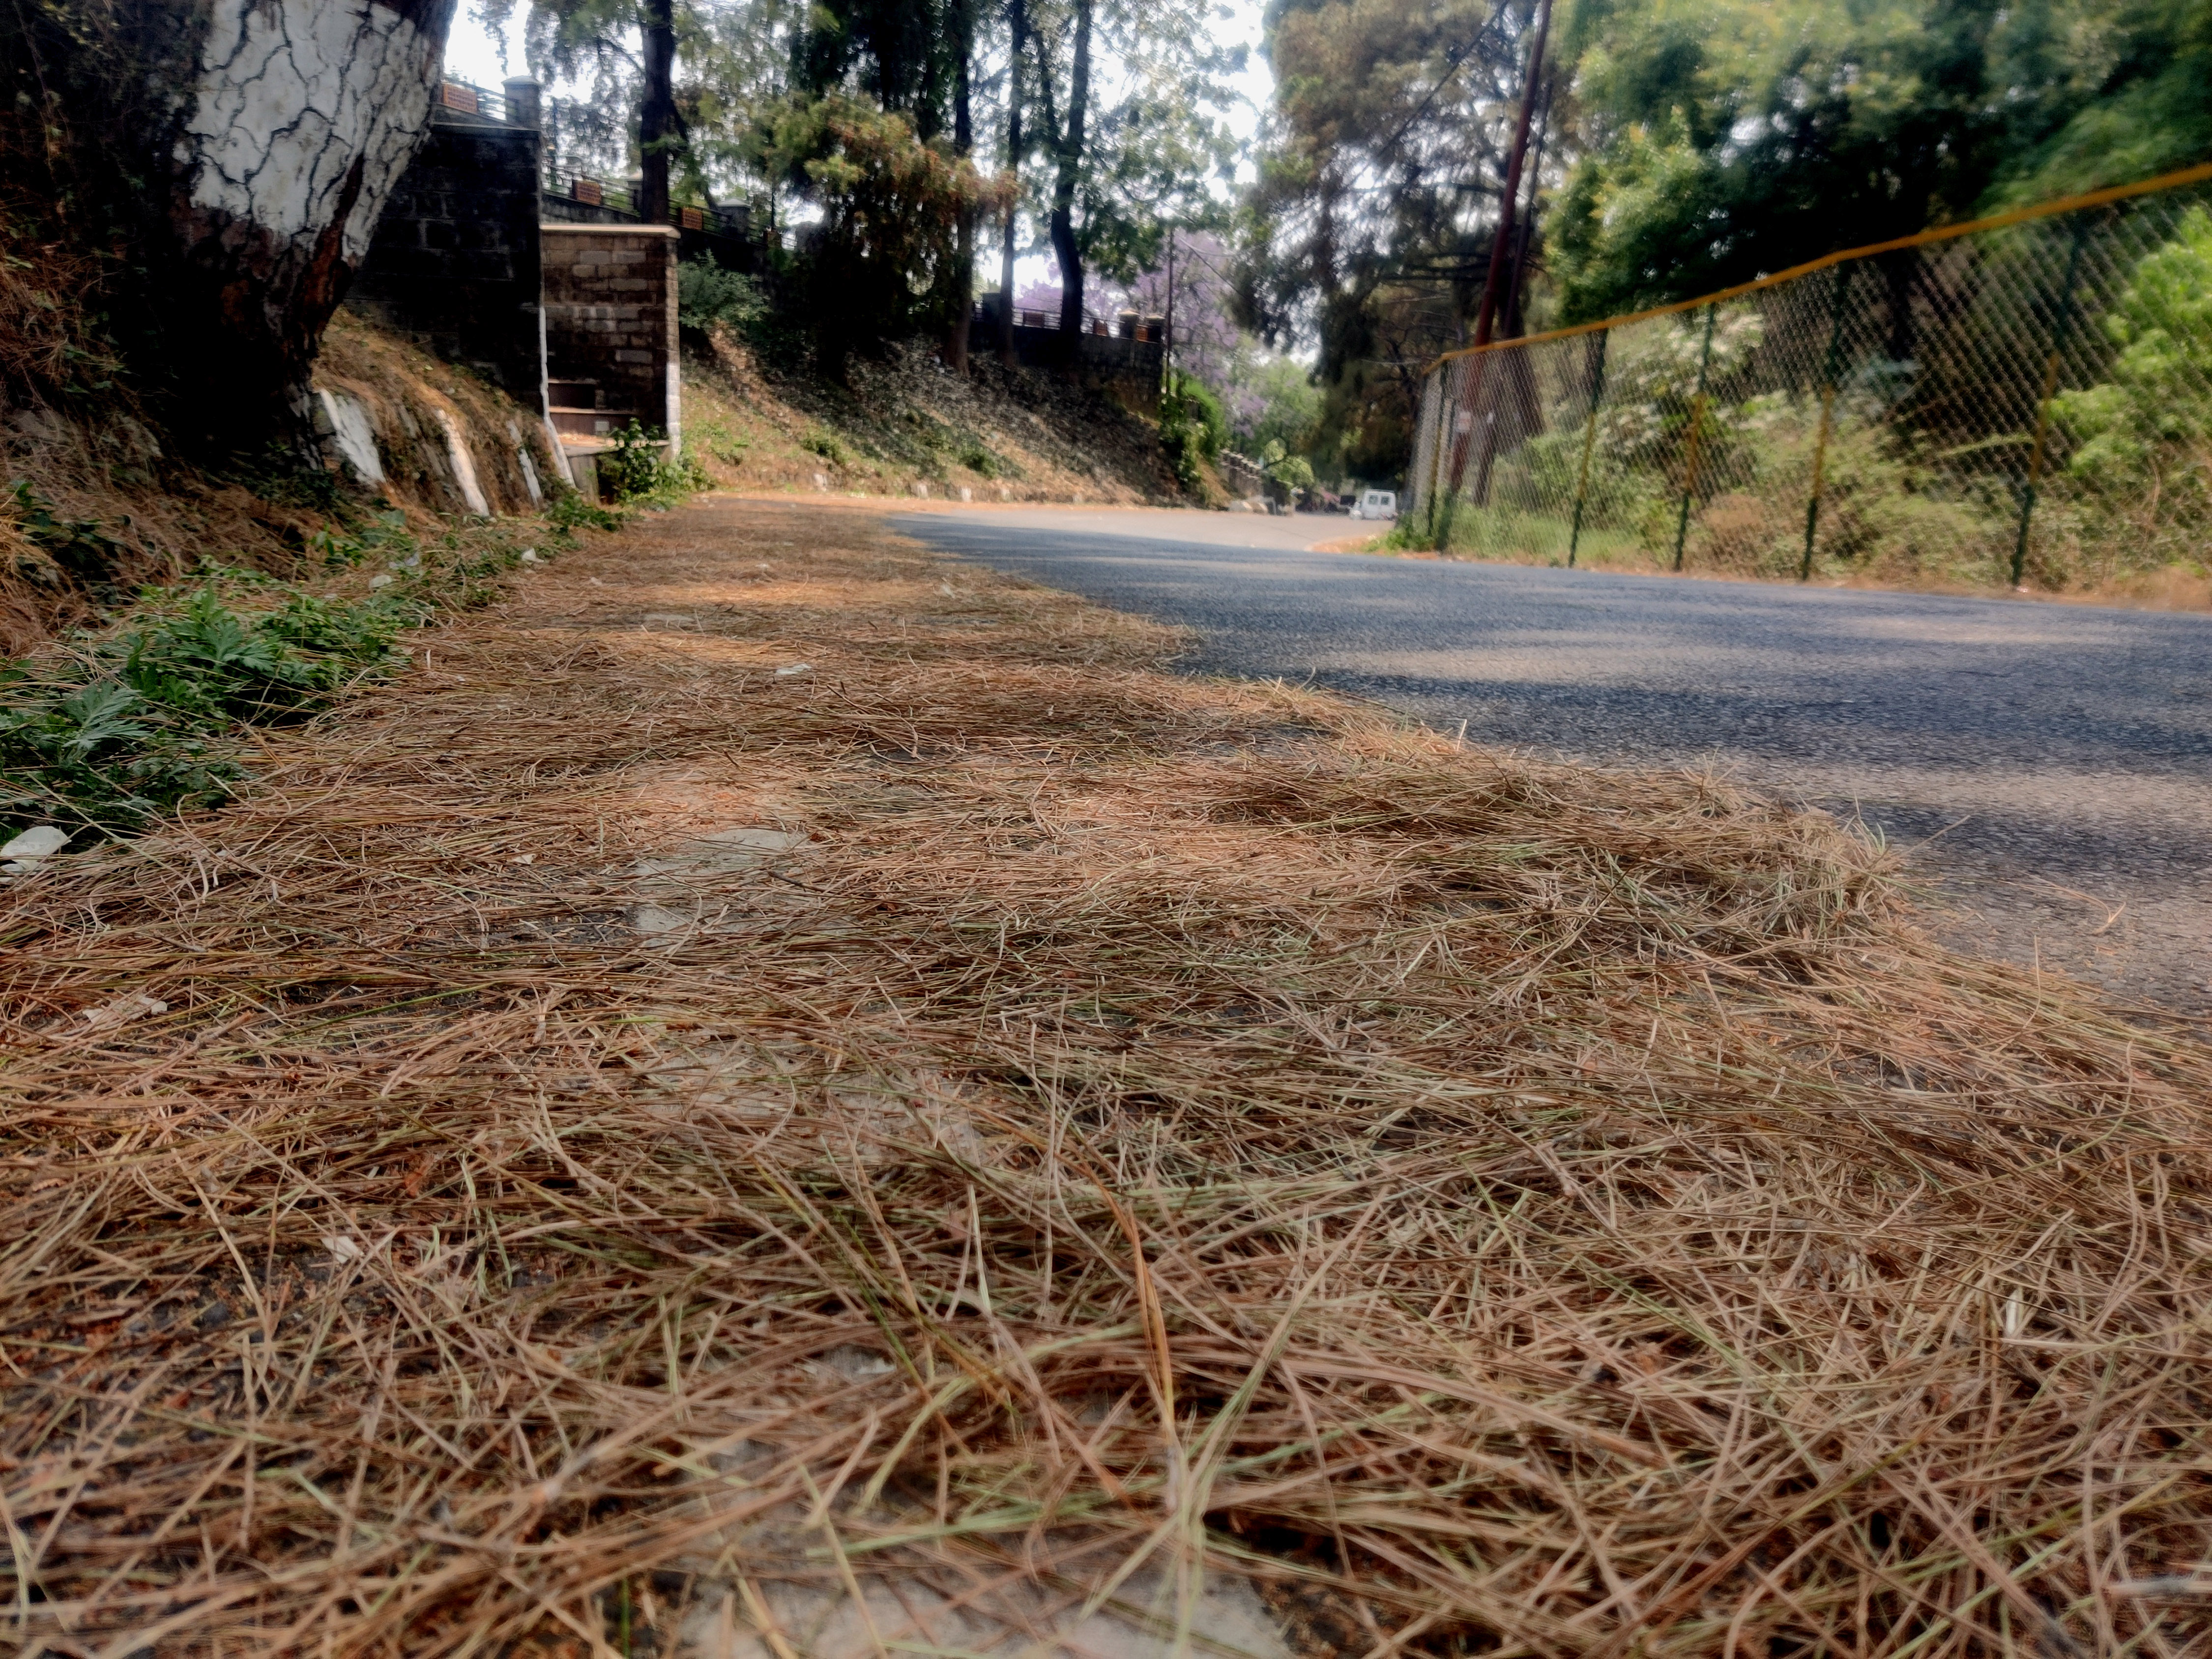 Pine needles pose fire threat in Dharamsala residential areas